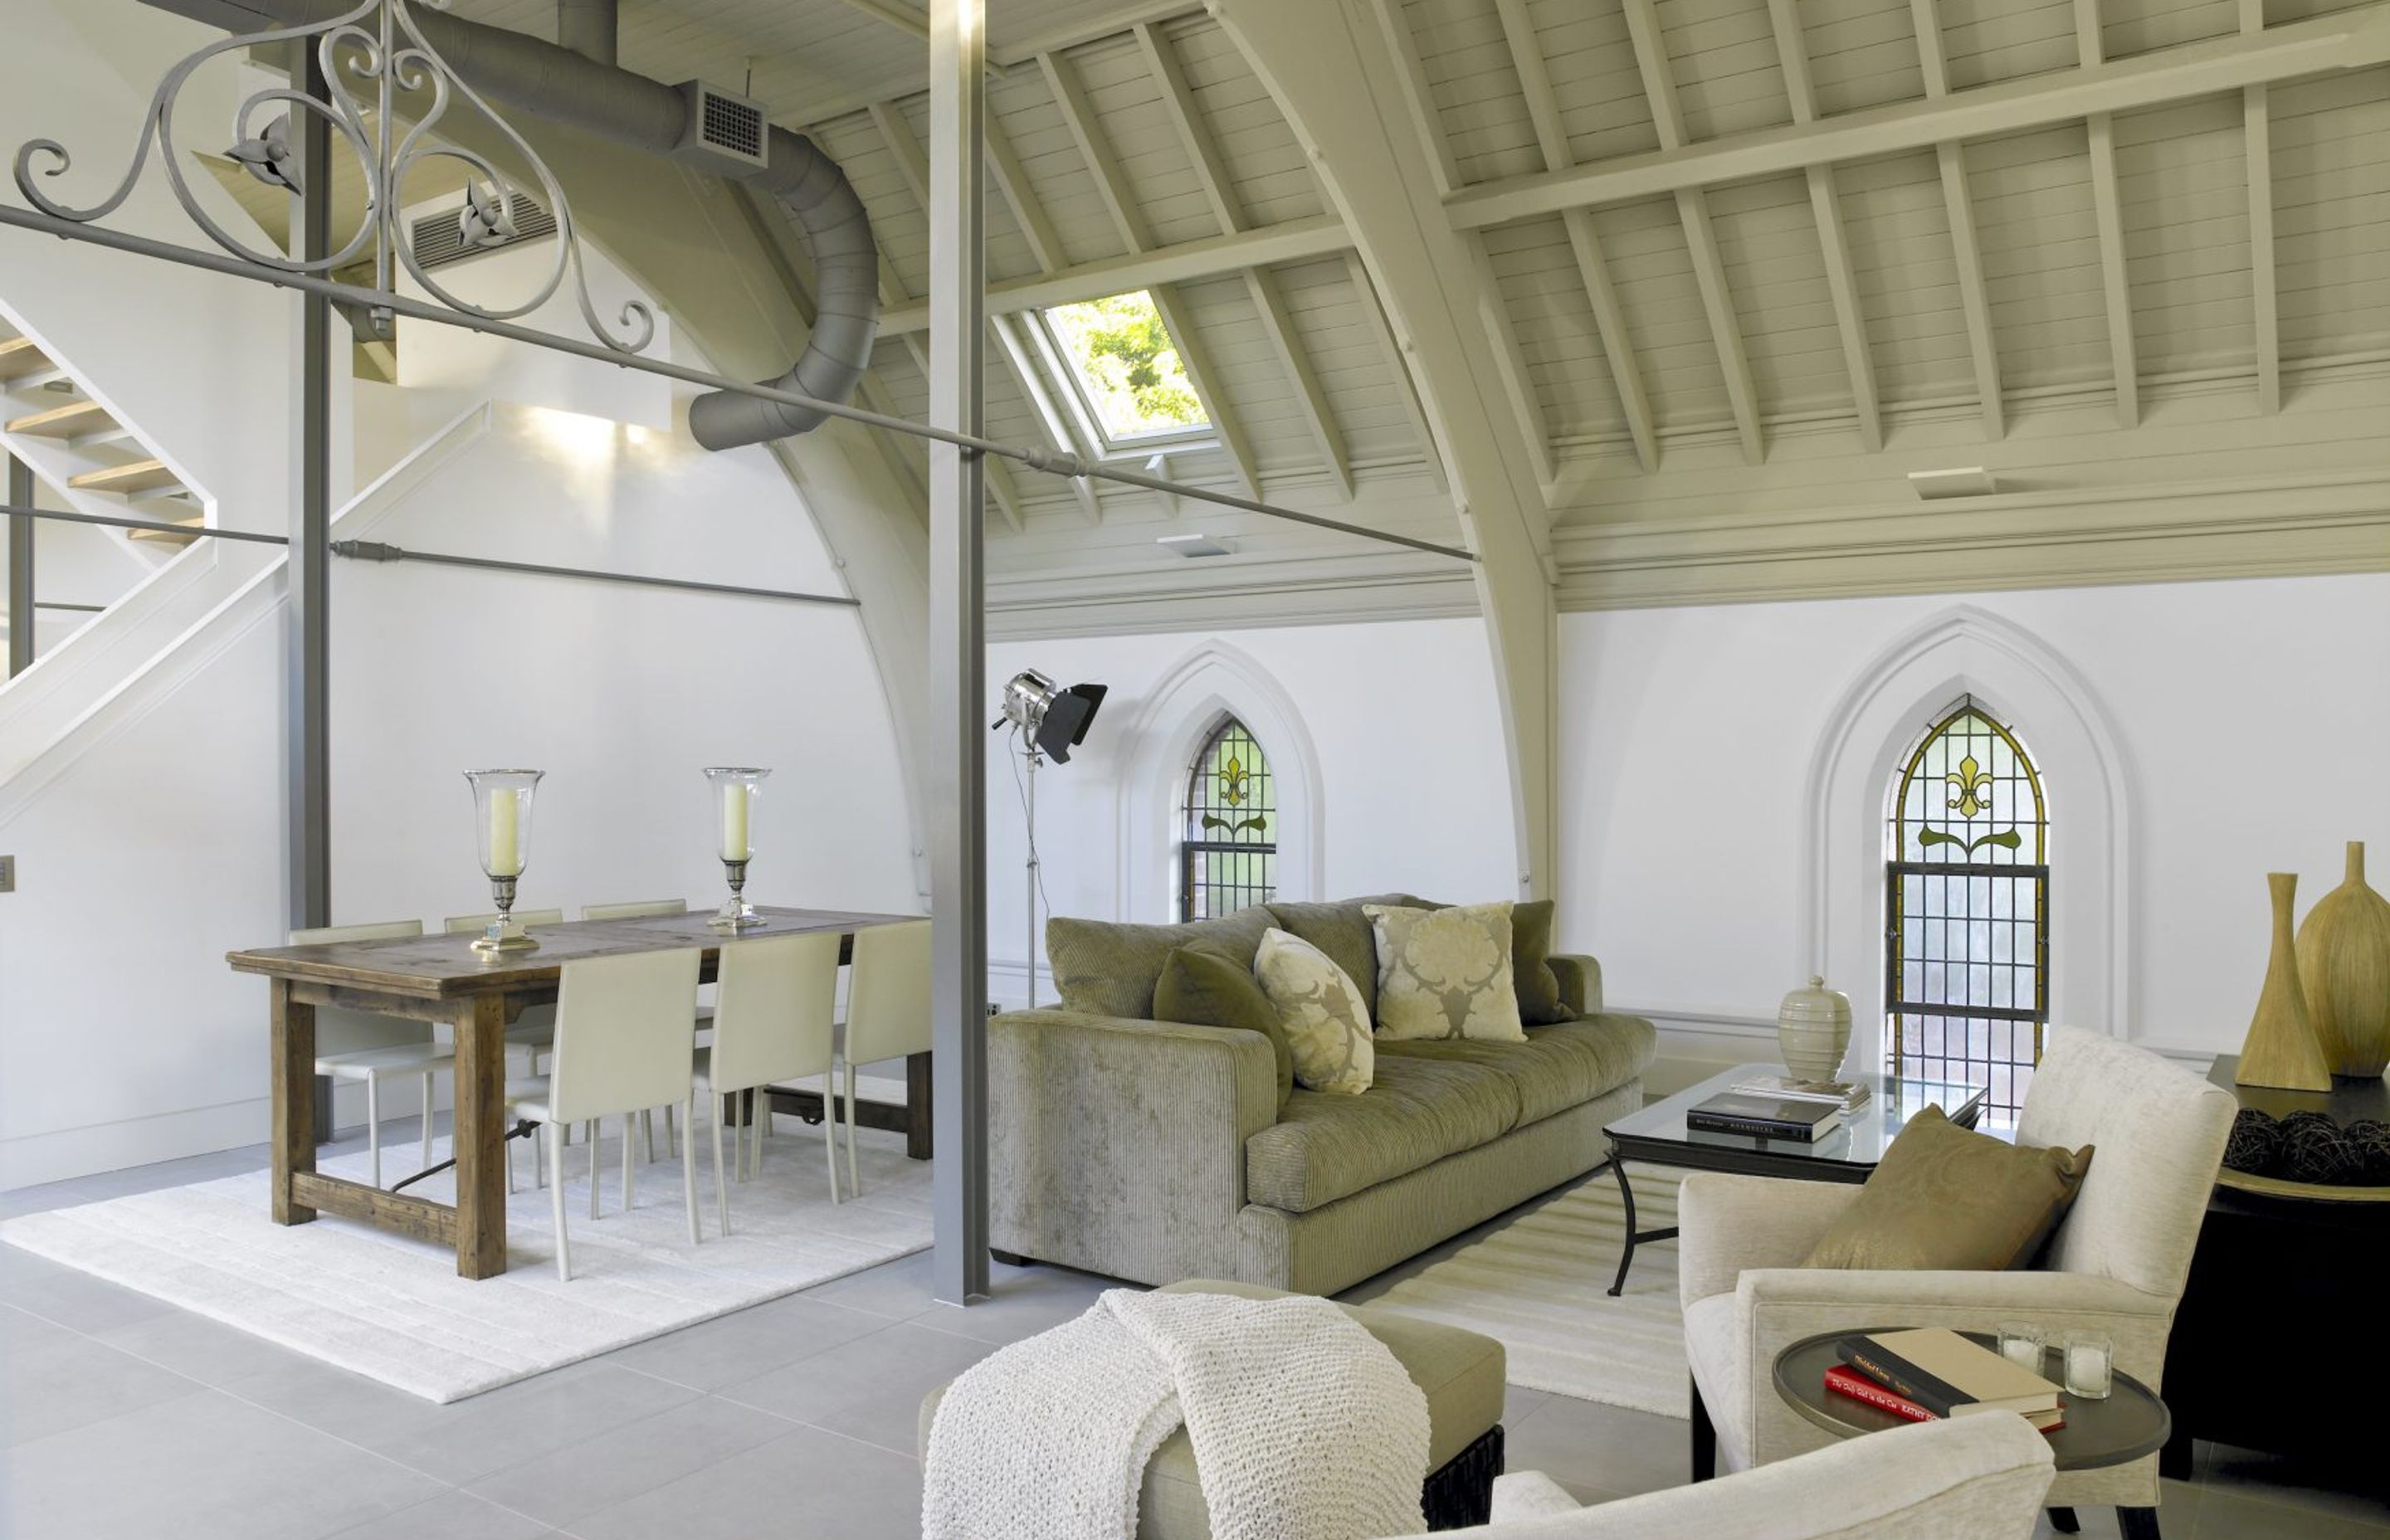 Mill Hill Church Conversion by BKA Architecture